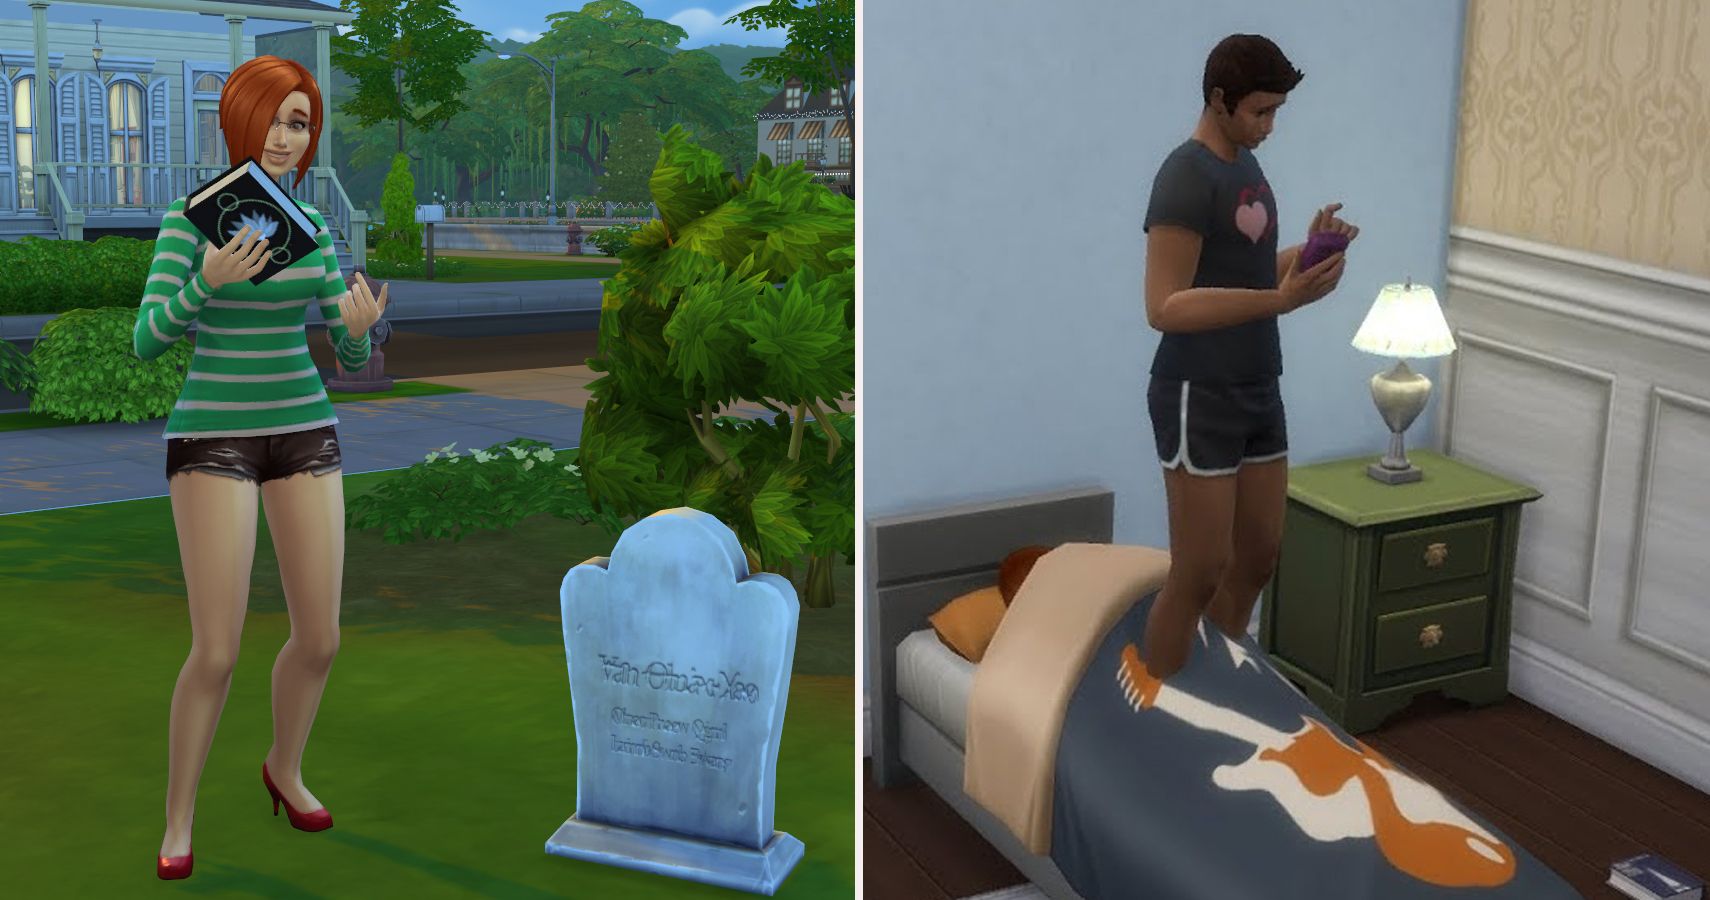 The 10 Best Sims Cheats, Ranked